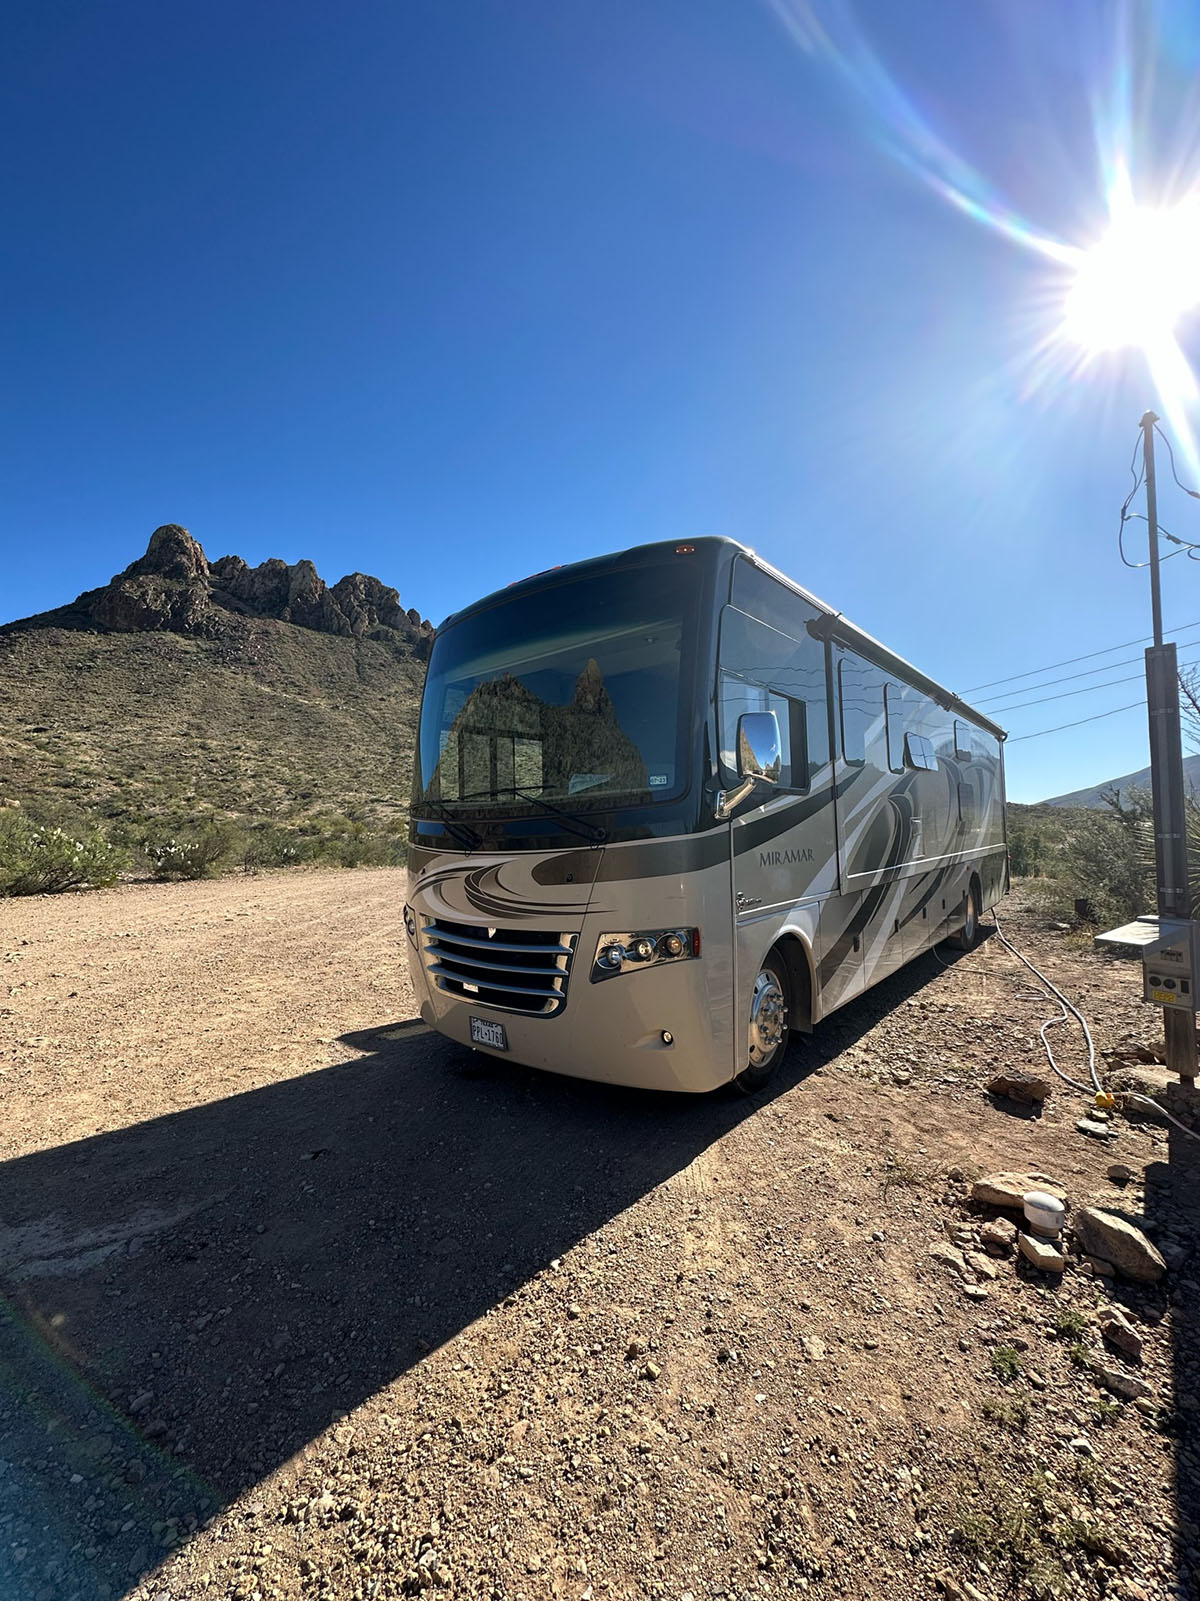 Class A 2015 Thor Motor Coach standing still in the Big Bend area